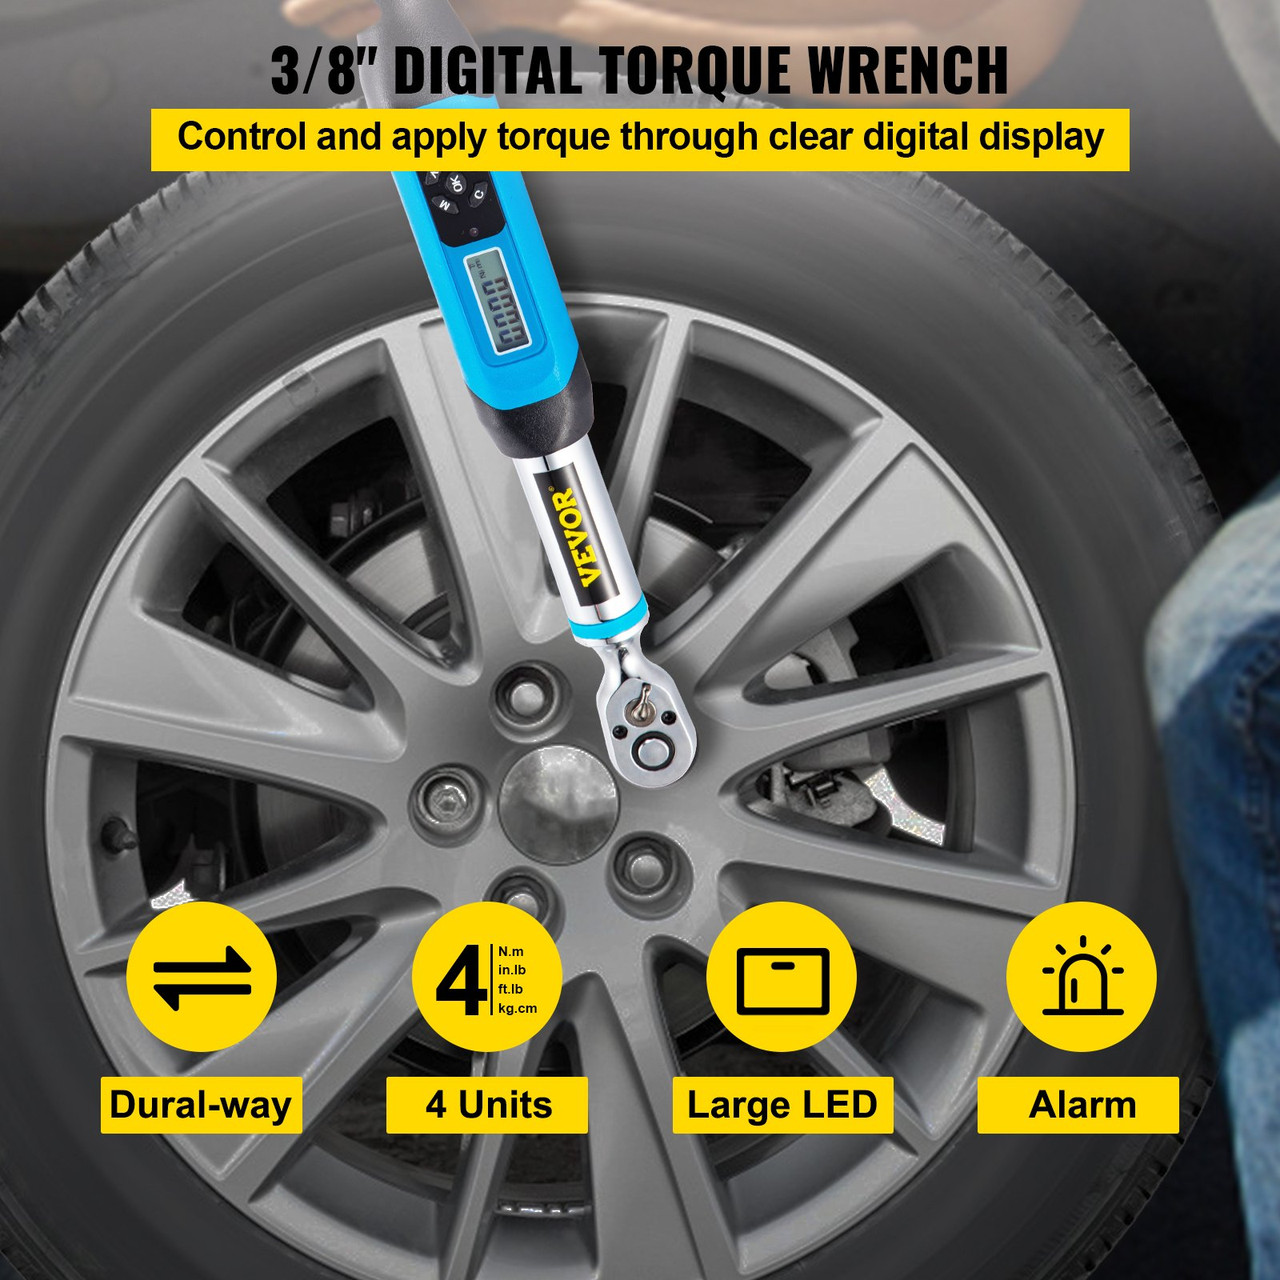 Digital Torque Wrench Adjustable Torque Wrench3/8" Drive 3.1-62.7 Ft-lbs